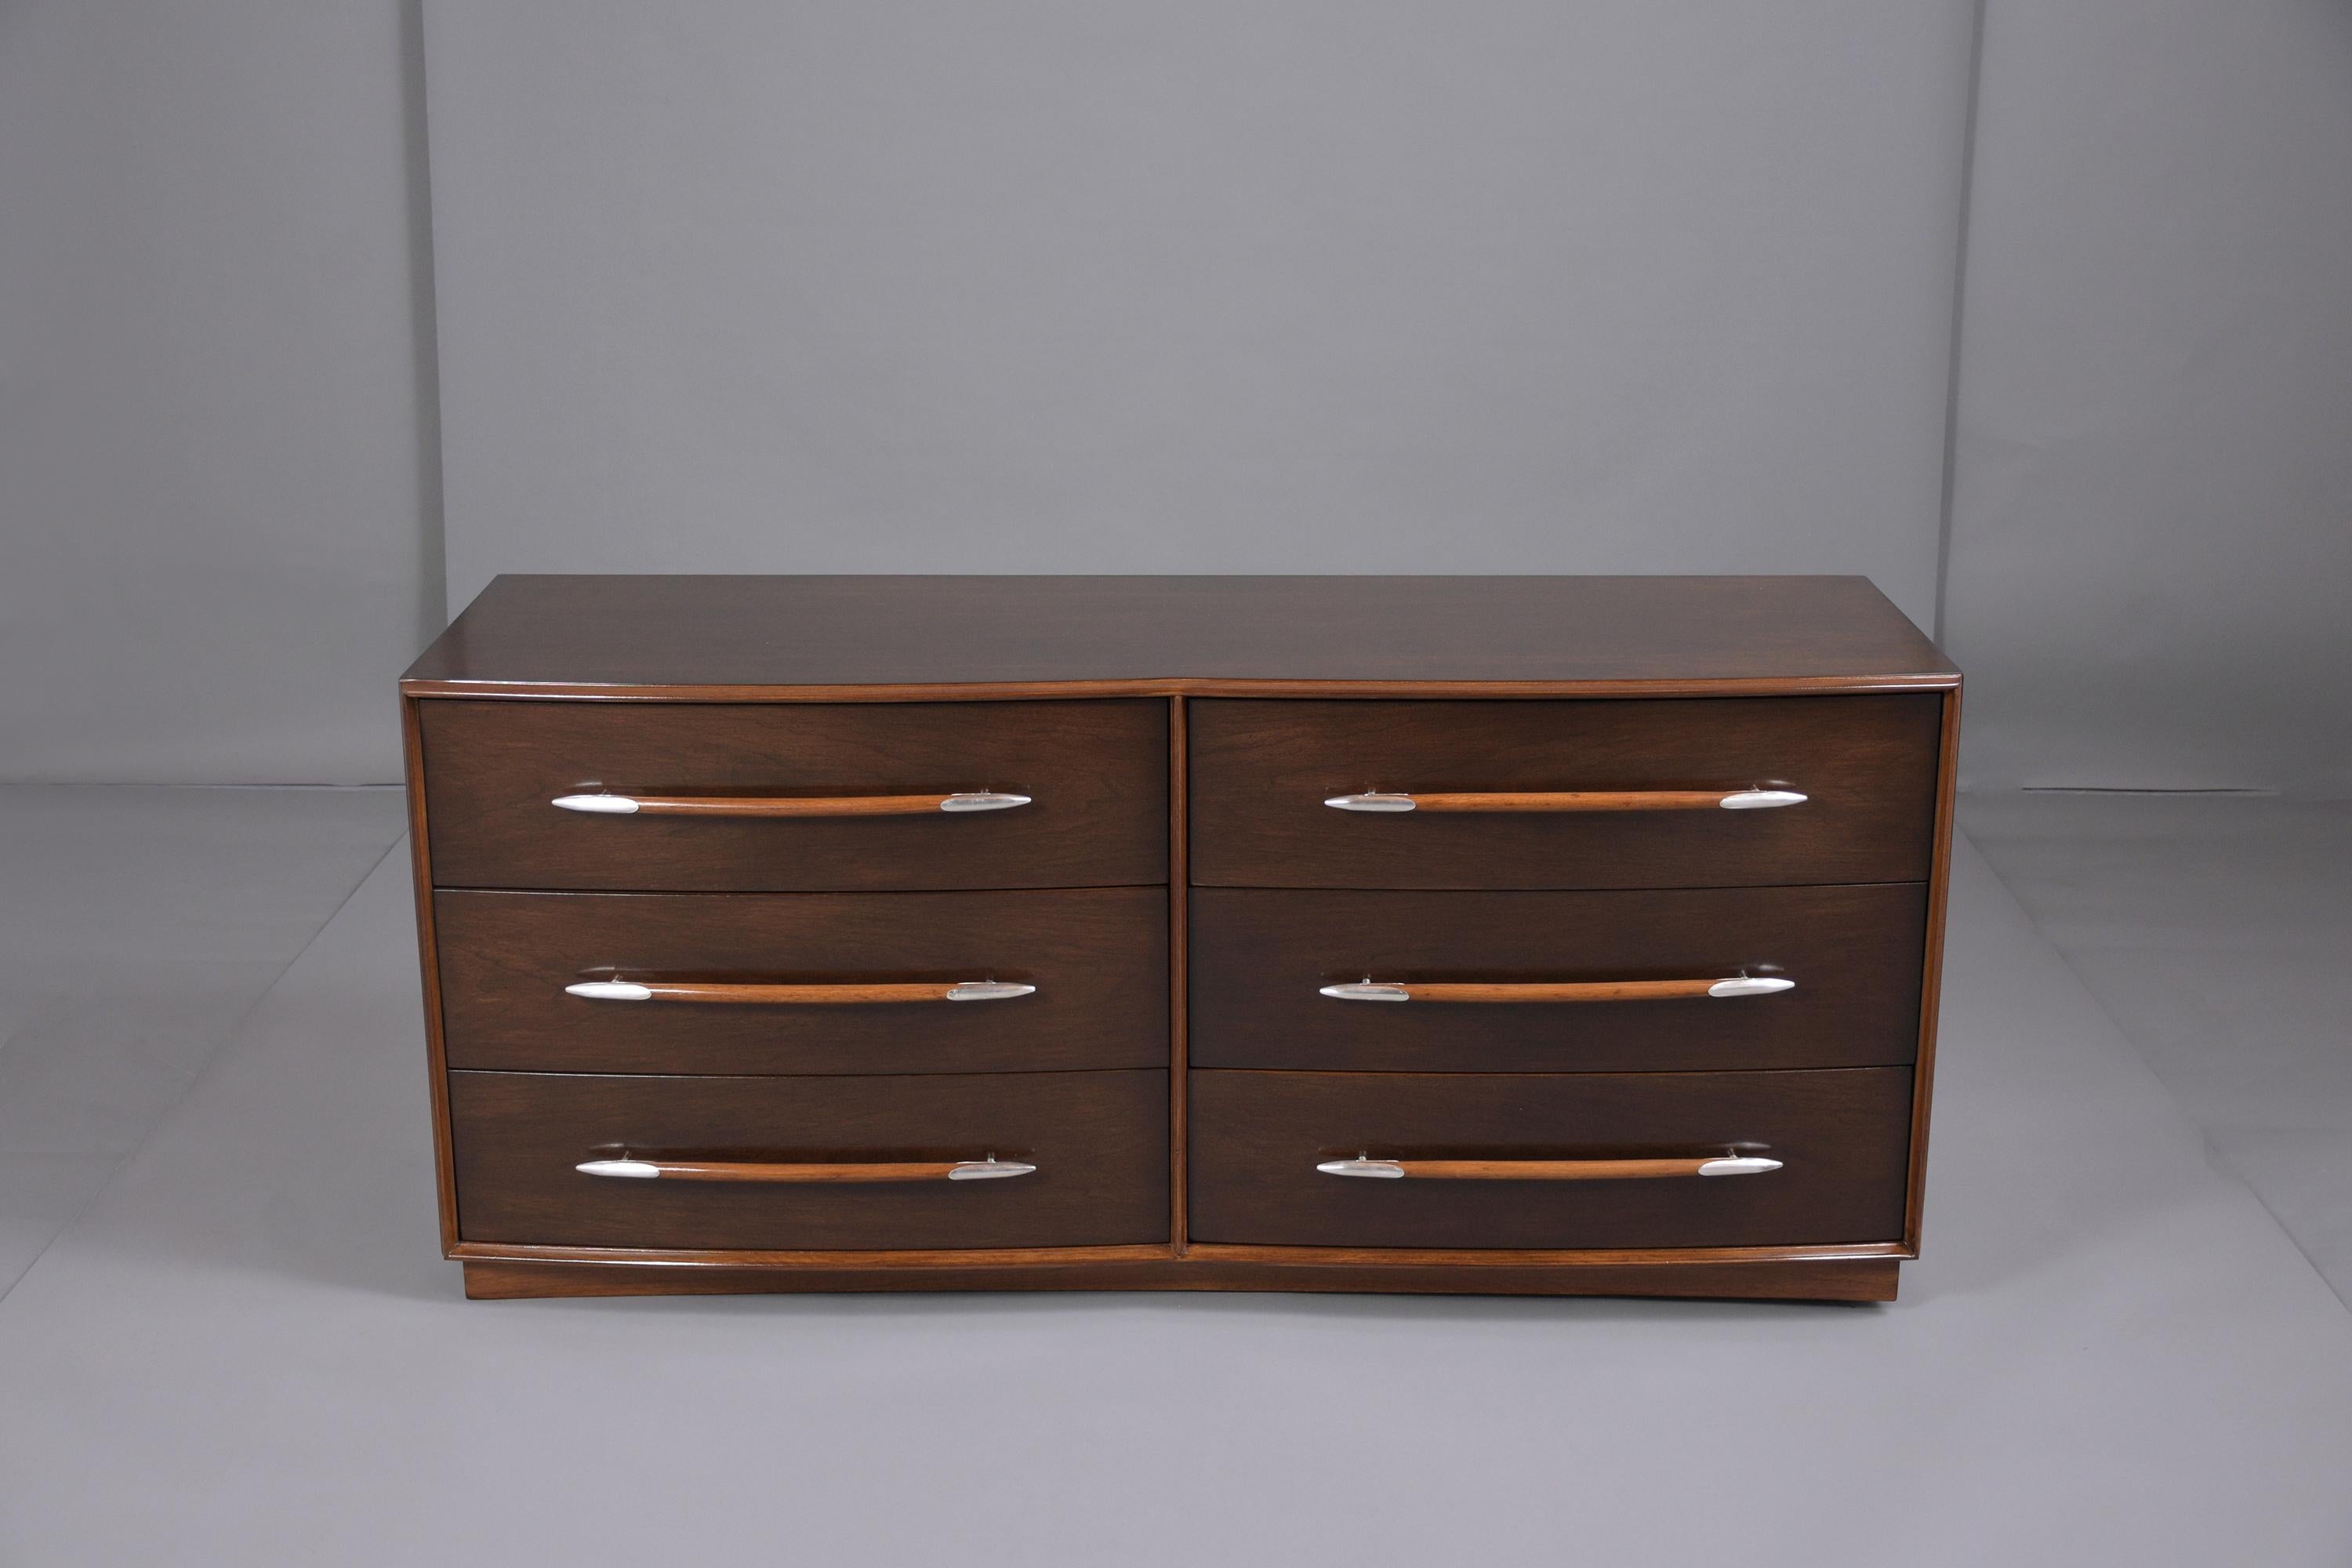 This T.H. Robs John Gibbings Widdicomb dresser has been newly stained in a rich dark ebony matte finish shows some transparency to the natural grain and has been fully restored by our team of craftsmen. This chest of drawers No. 5039 by T.H.